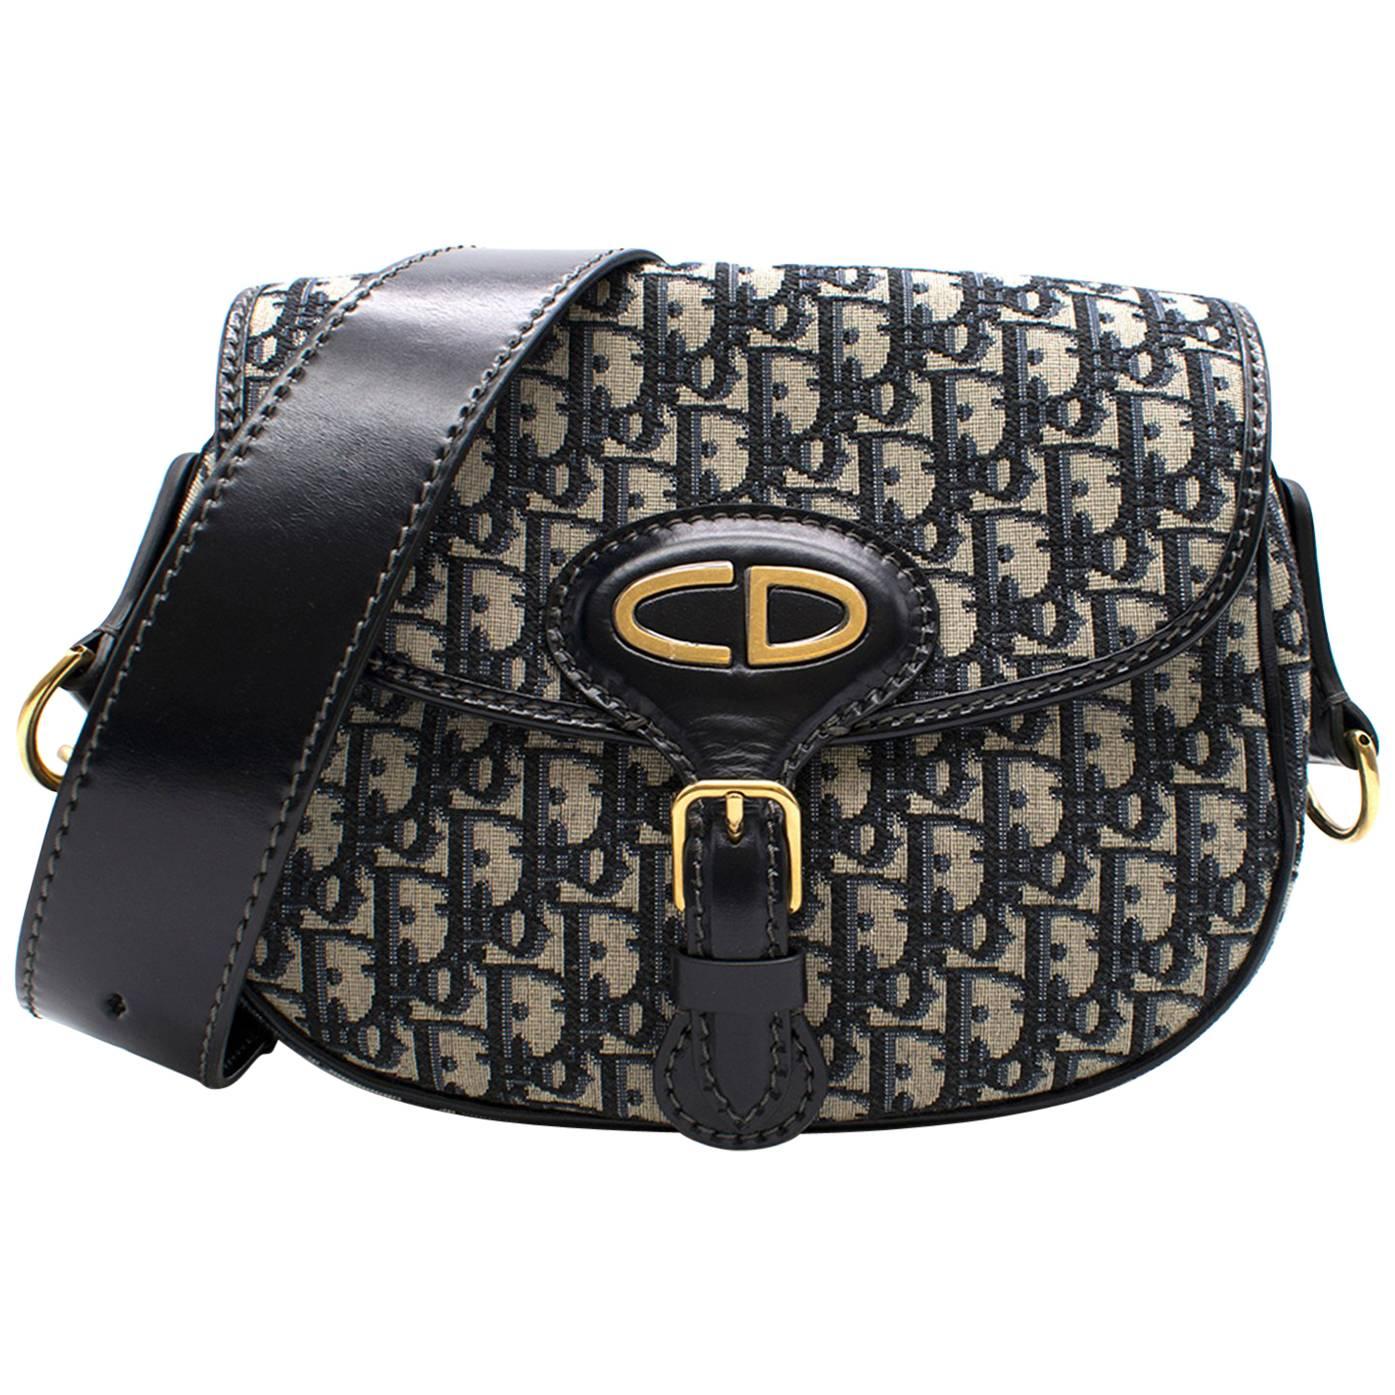  Dior Monogram Canvas and Leather Bag For Sale